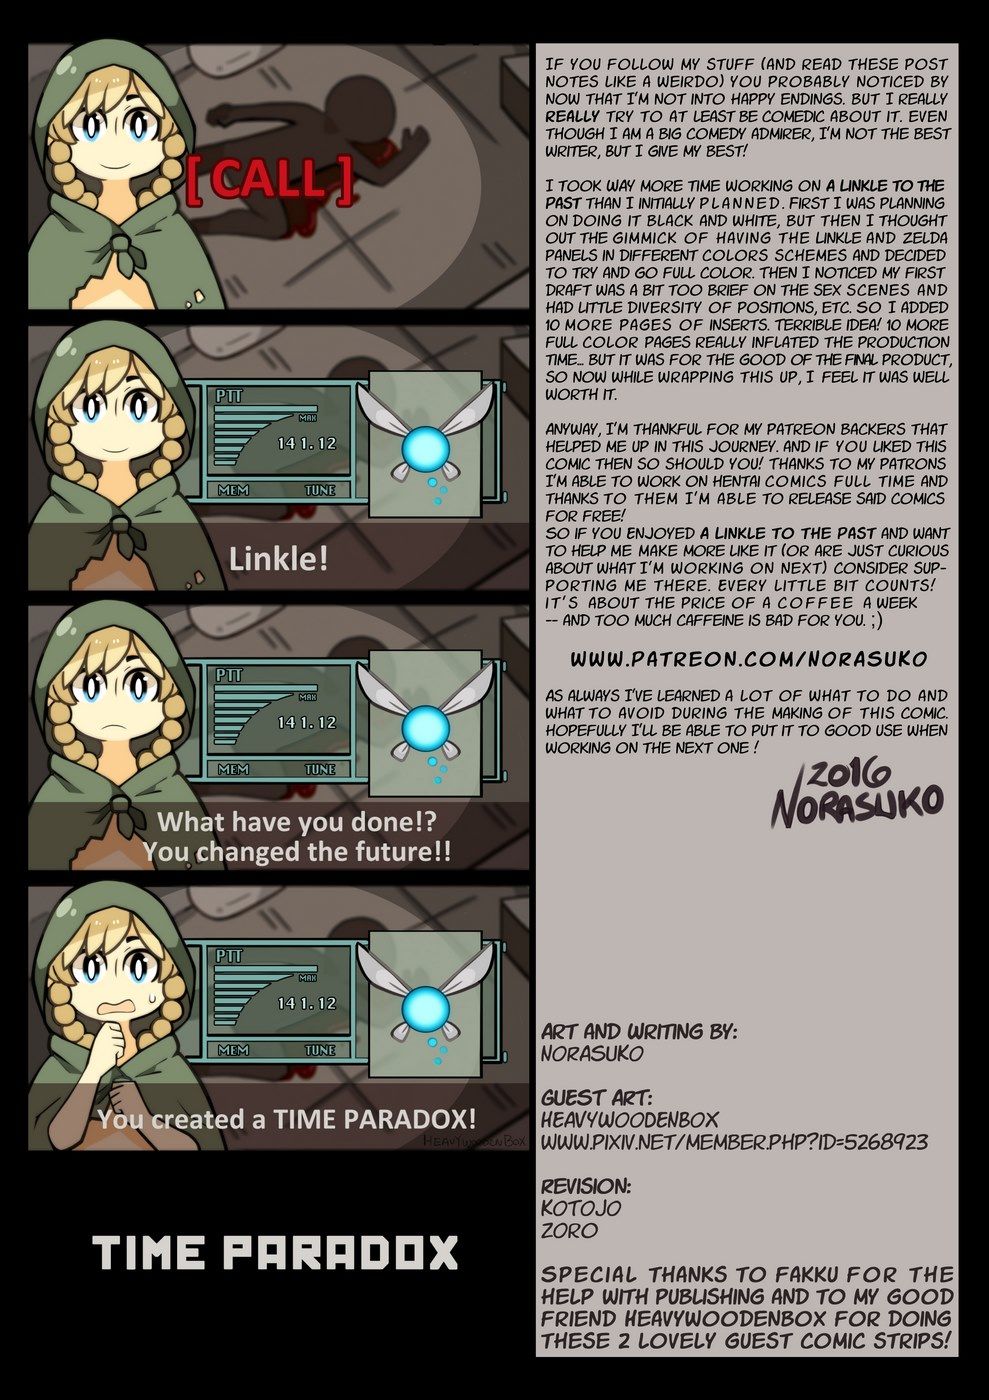 [Norasuko] A Linkle to the Past (The Legend of Zelda) page 33